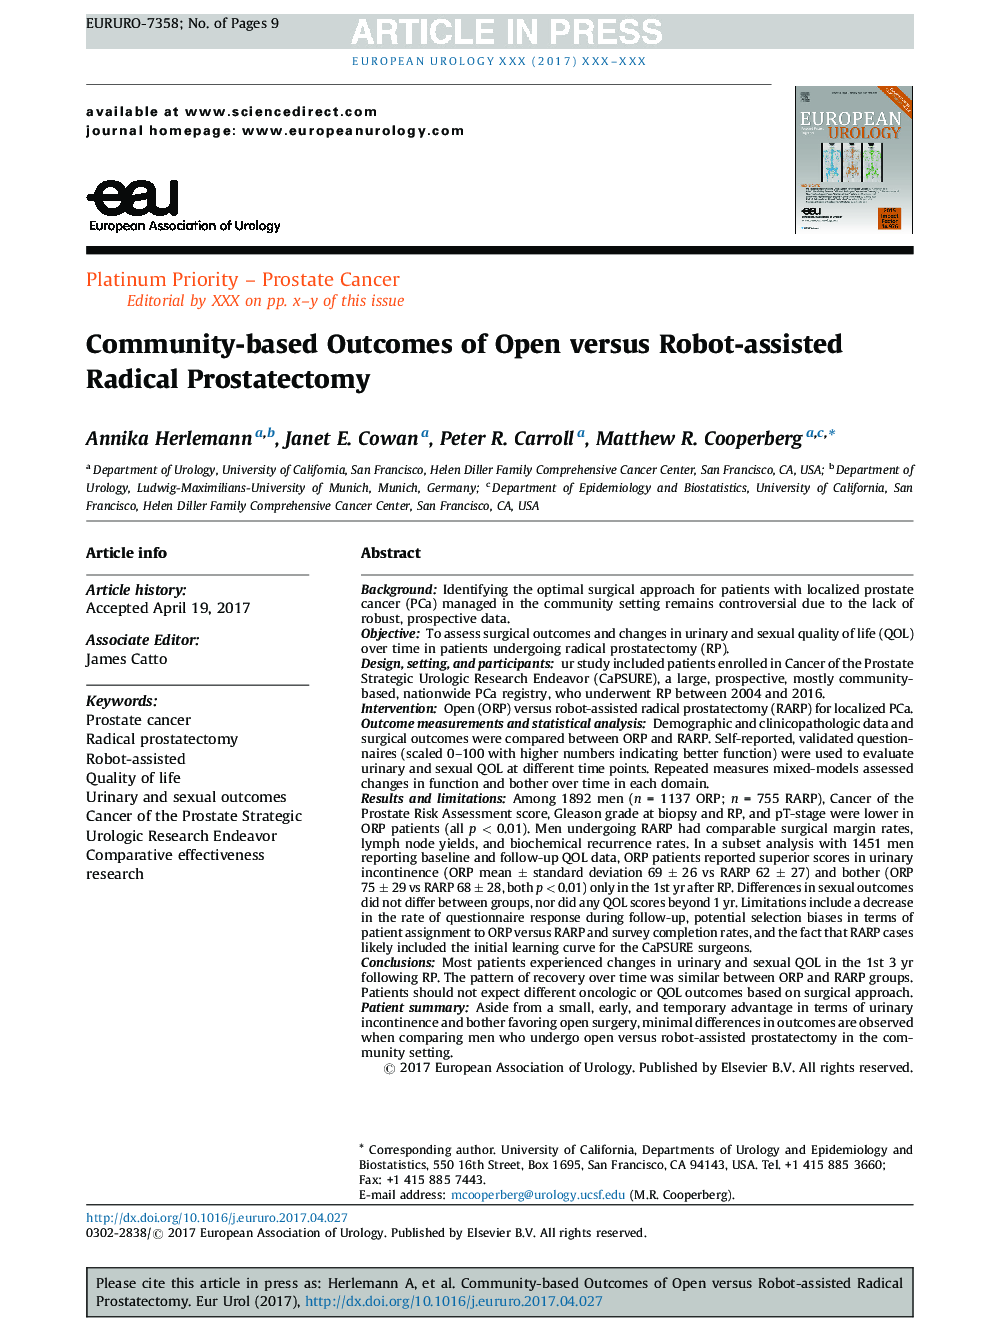 Community-based Outcomes of Open versus Robot-assisted Radical Prostatectomy